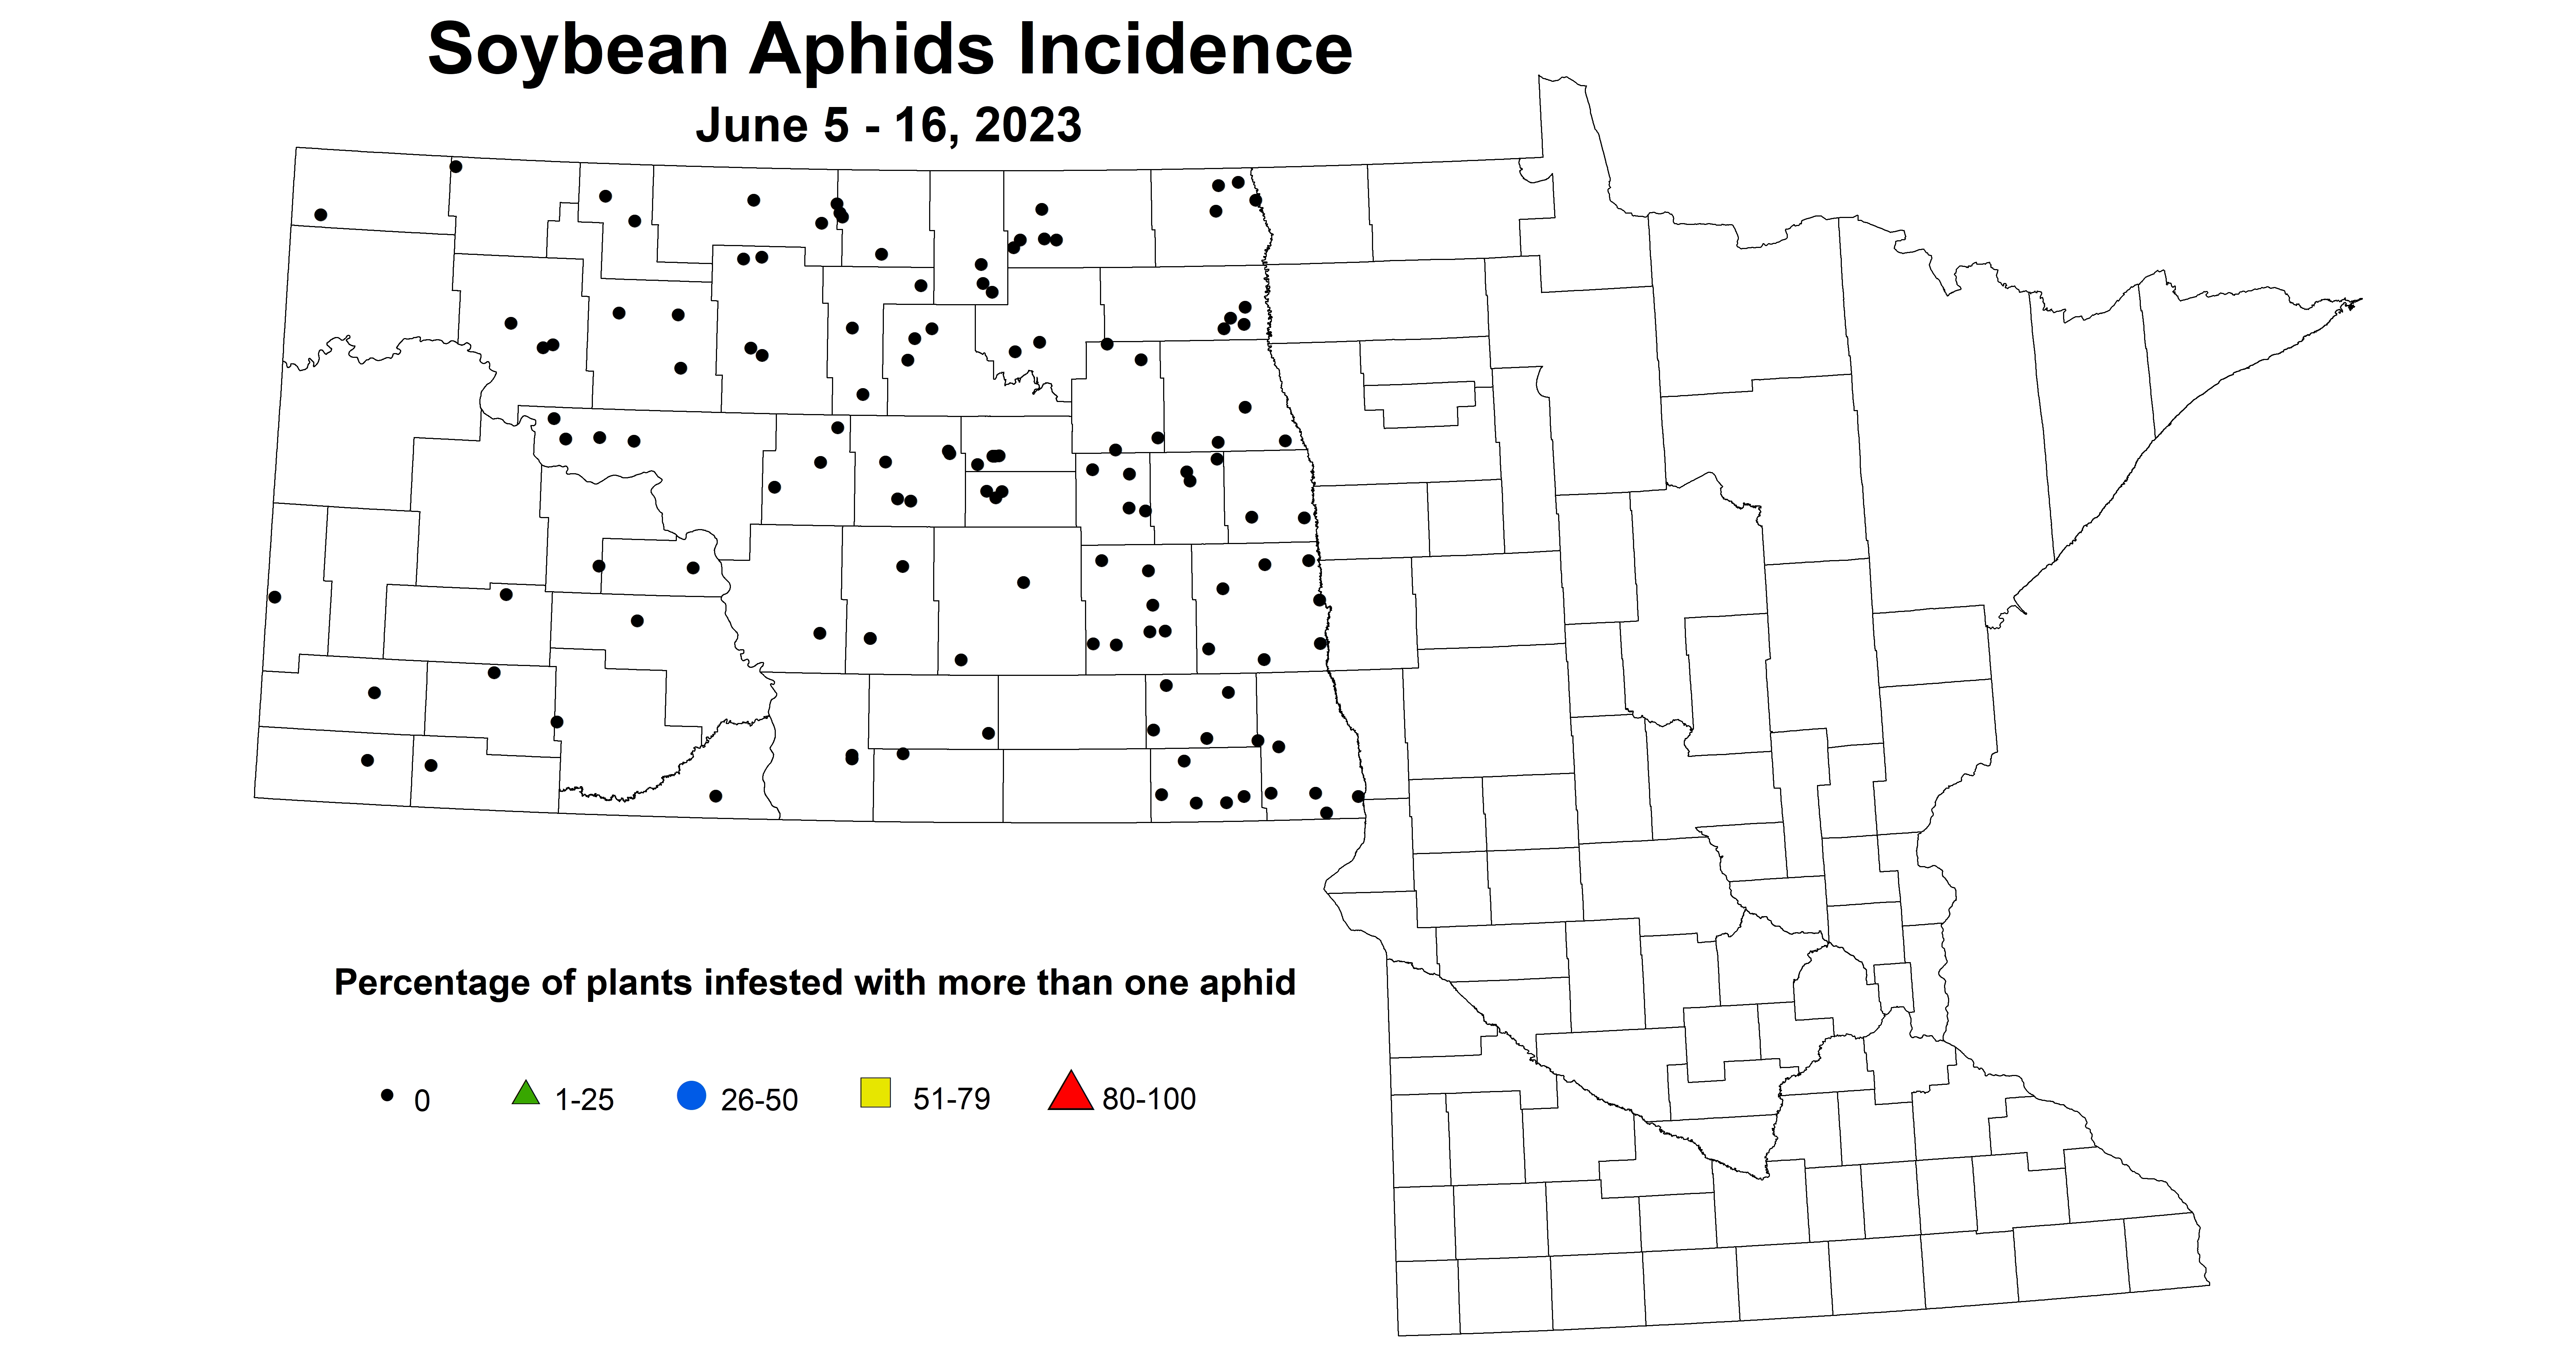 soybean aphids incidence June 5-16 2023